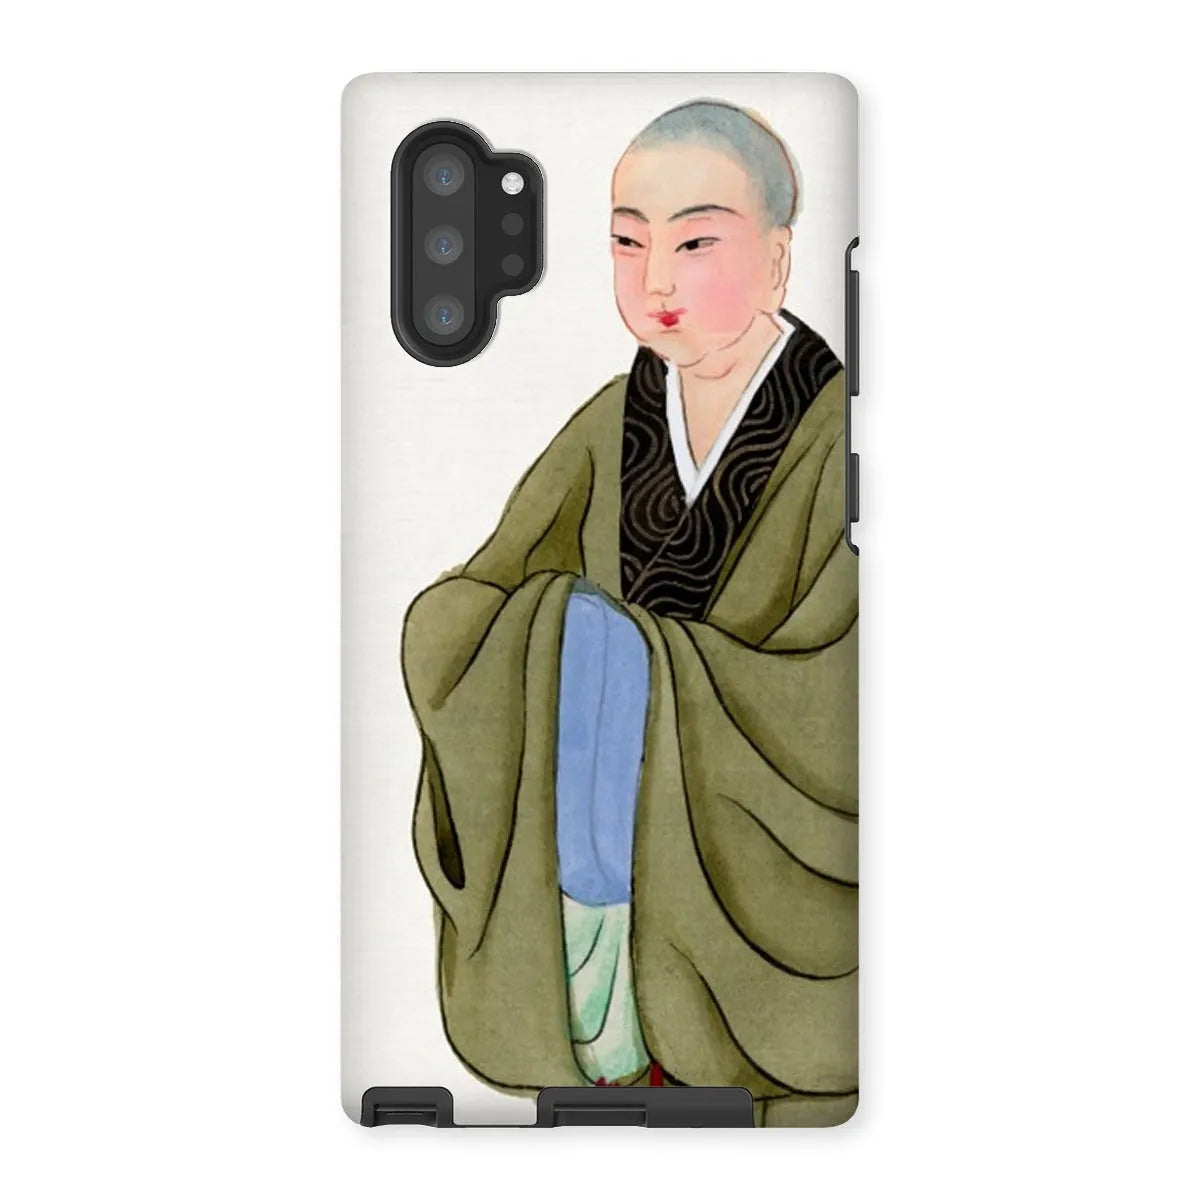 Buddhist Monk - Manchu Chinese Aesthetic Art Phone Case - Samsung Galaxy Note 10p / Matte - Mobile Phone Cases